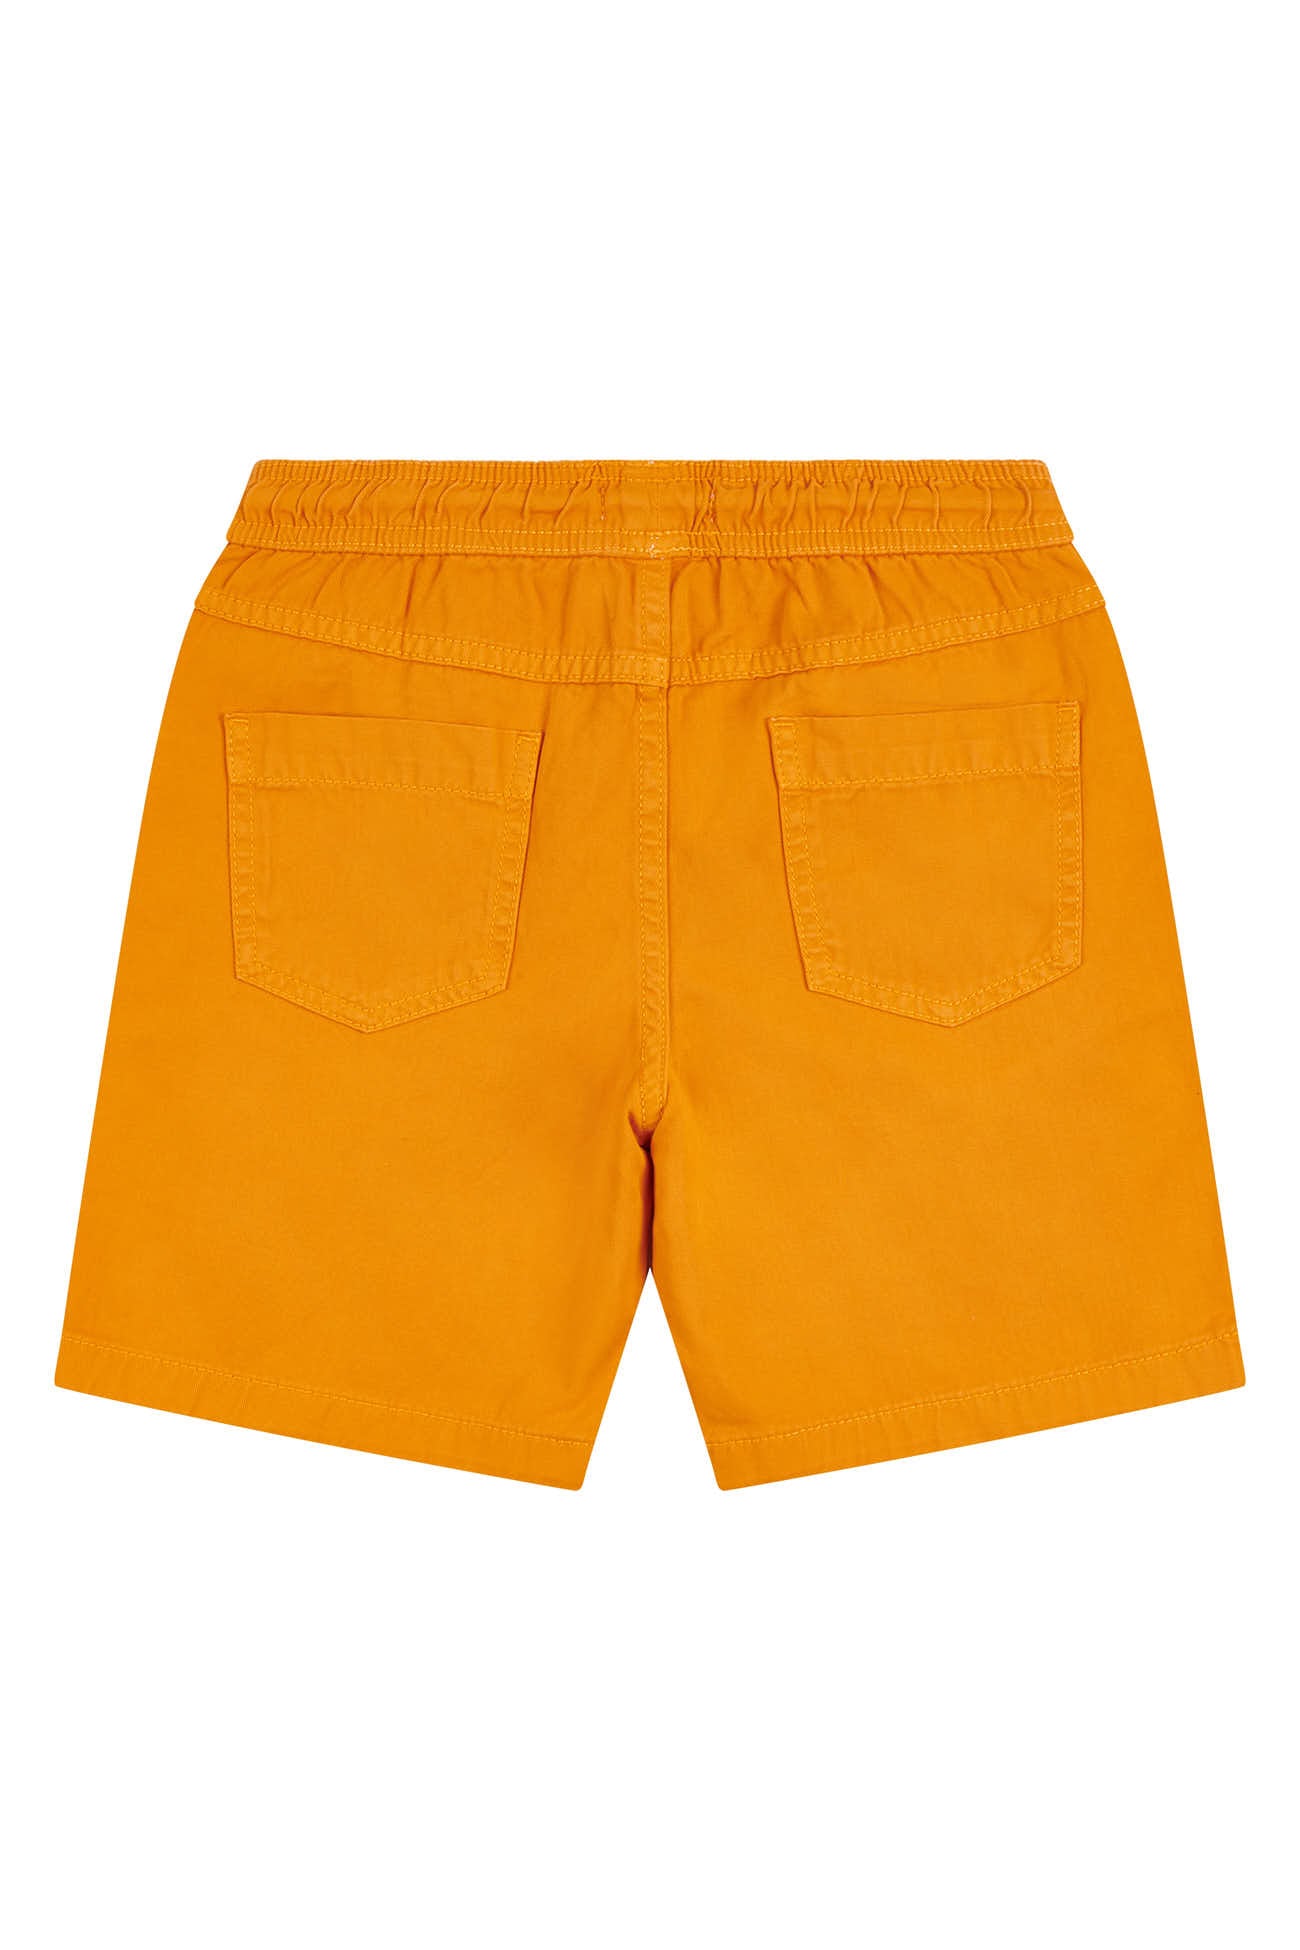 Boys Classic Shorts in Apricot